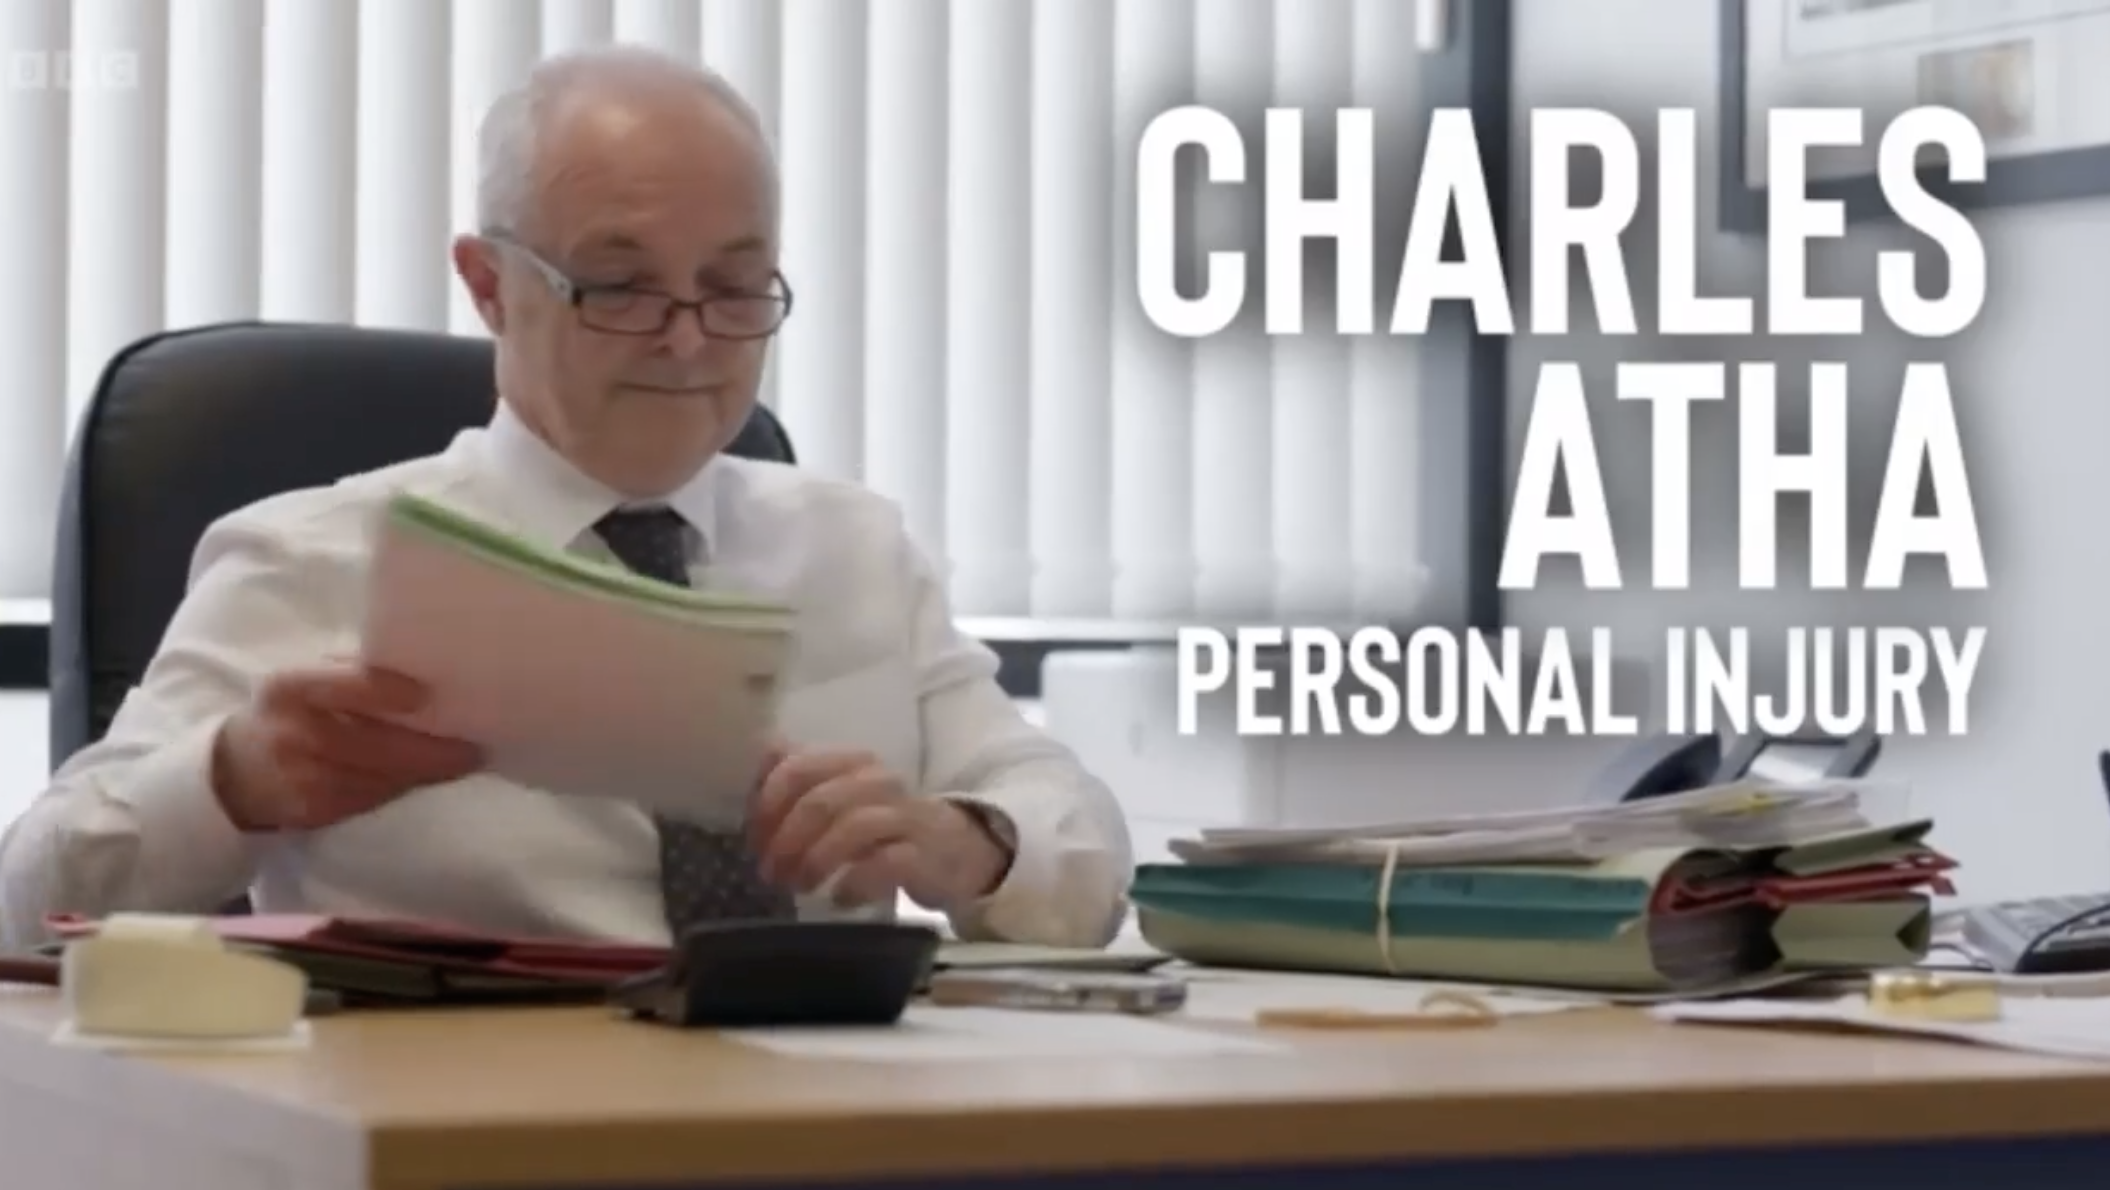 charles atha personal injury specialist